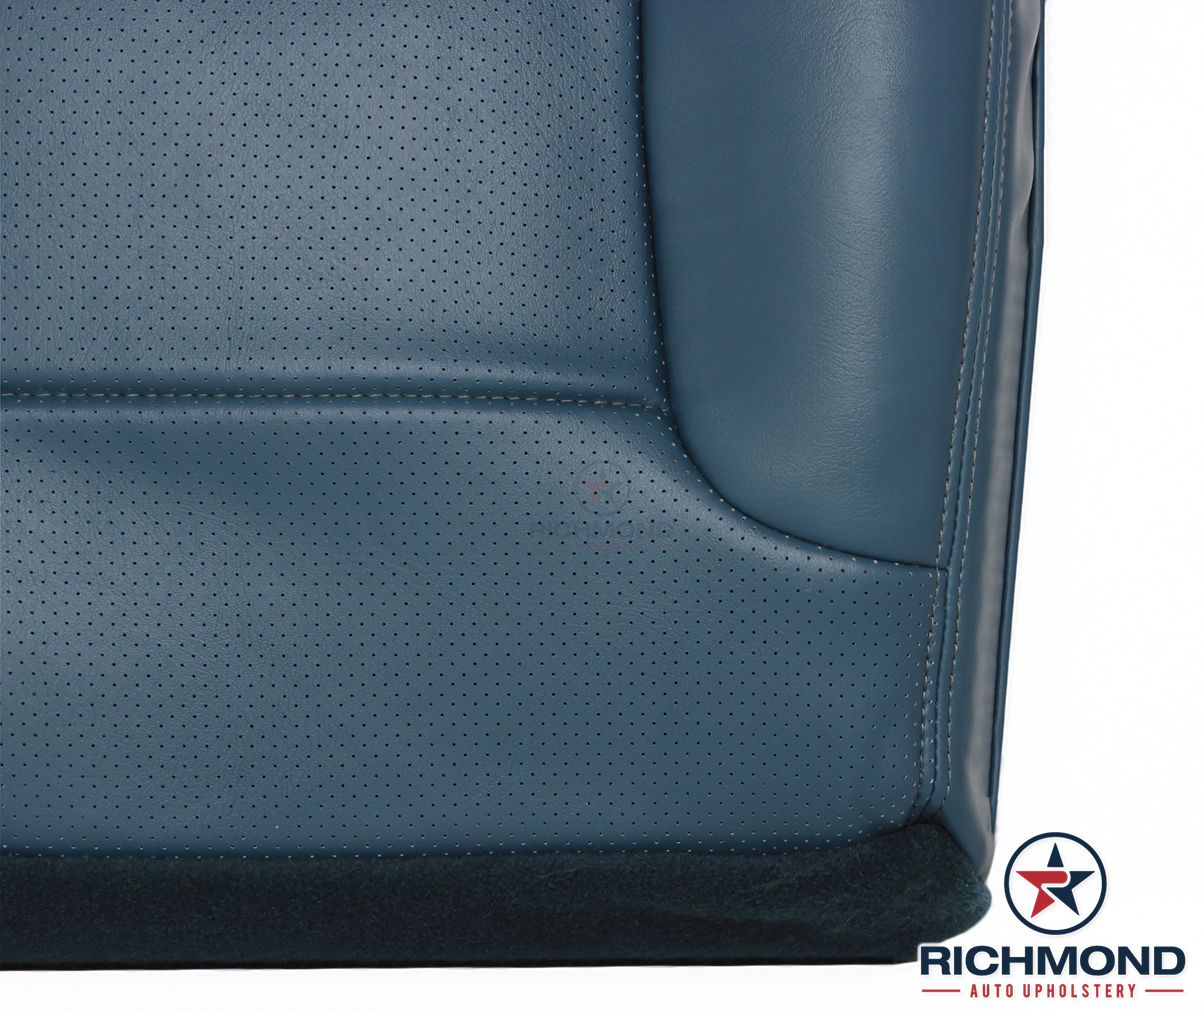  photo 1992-1996-Ford-Bronco-Driver-Side-Bottom-Leather-Seat-Blue-6_zpsp0ecrf3t.jpg